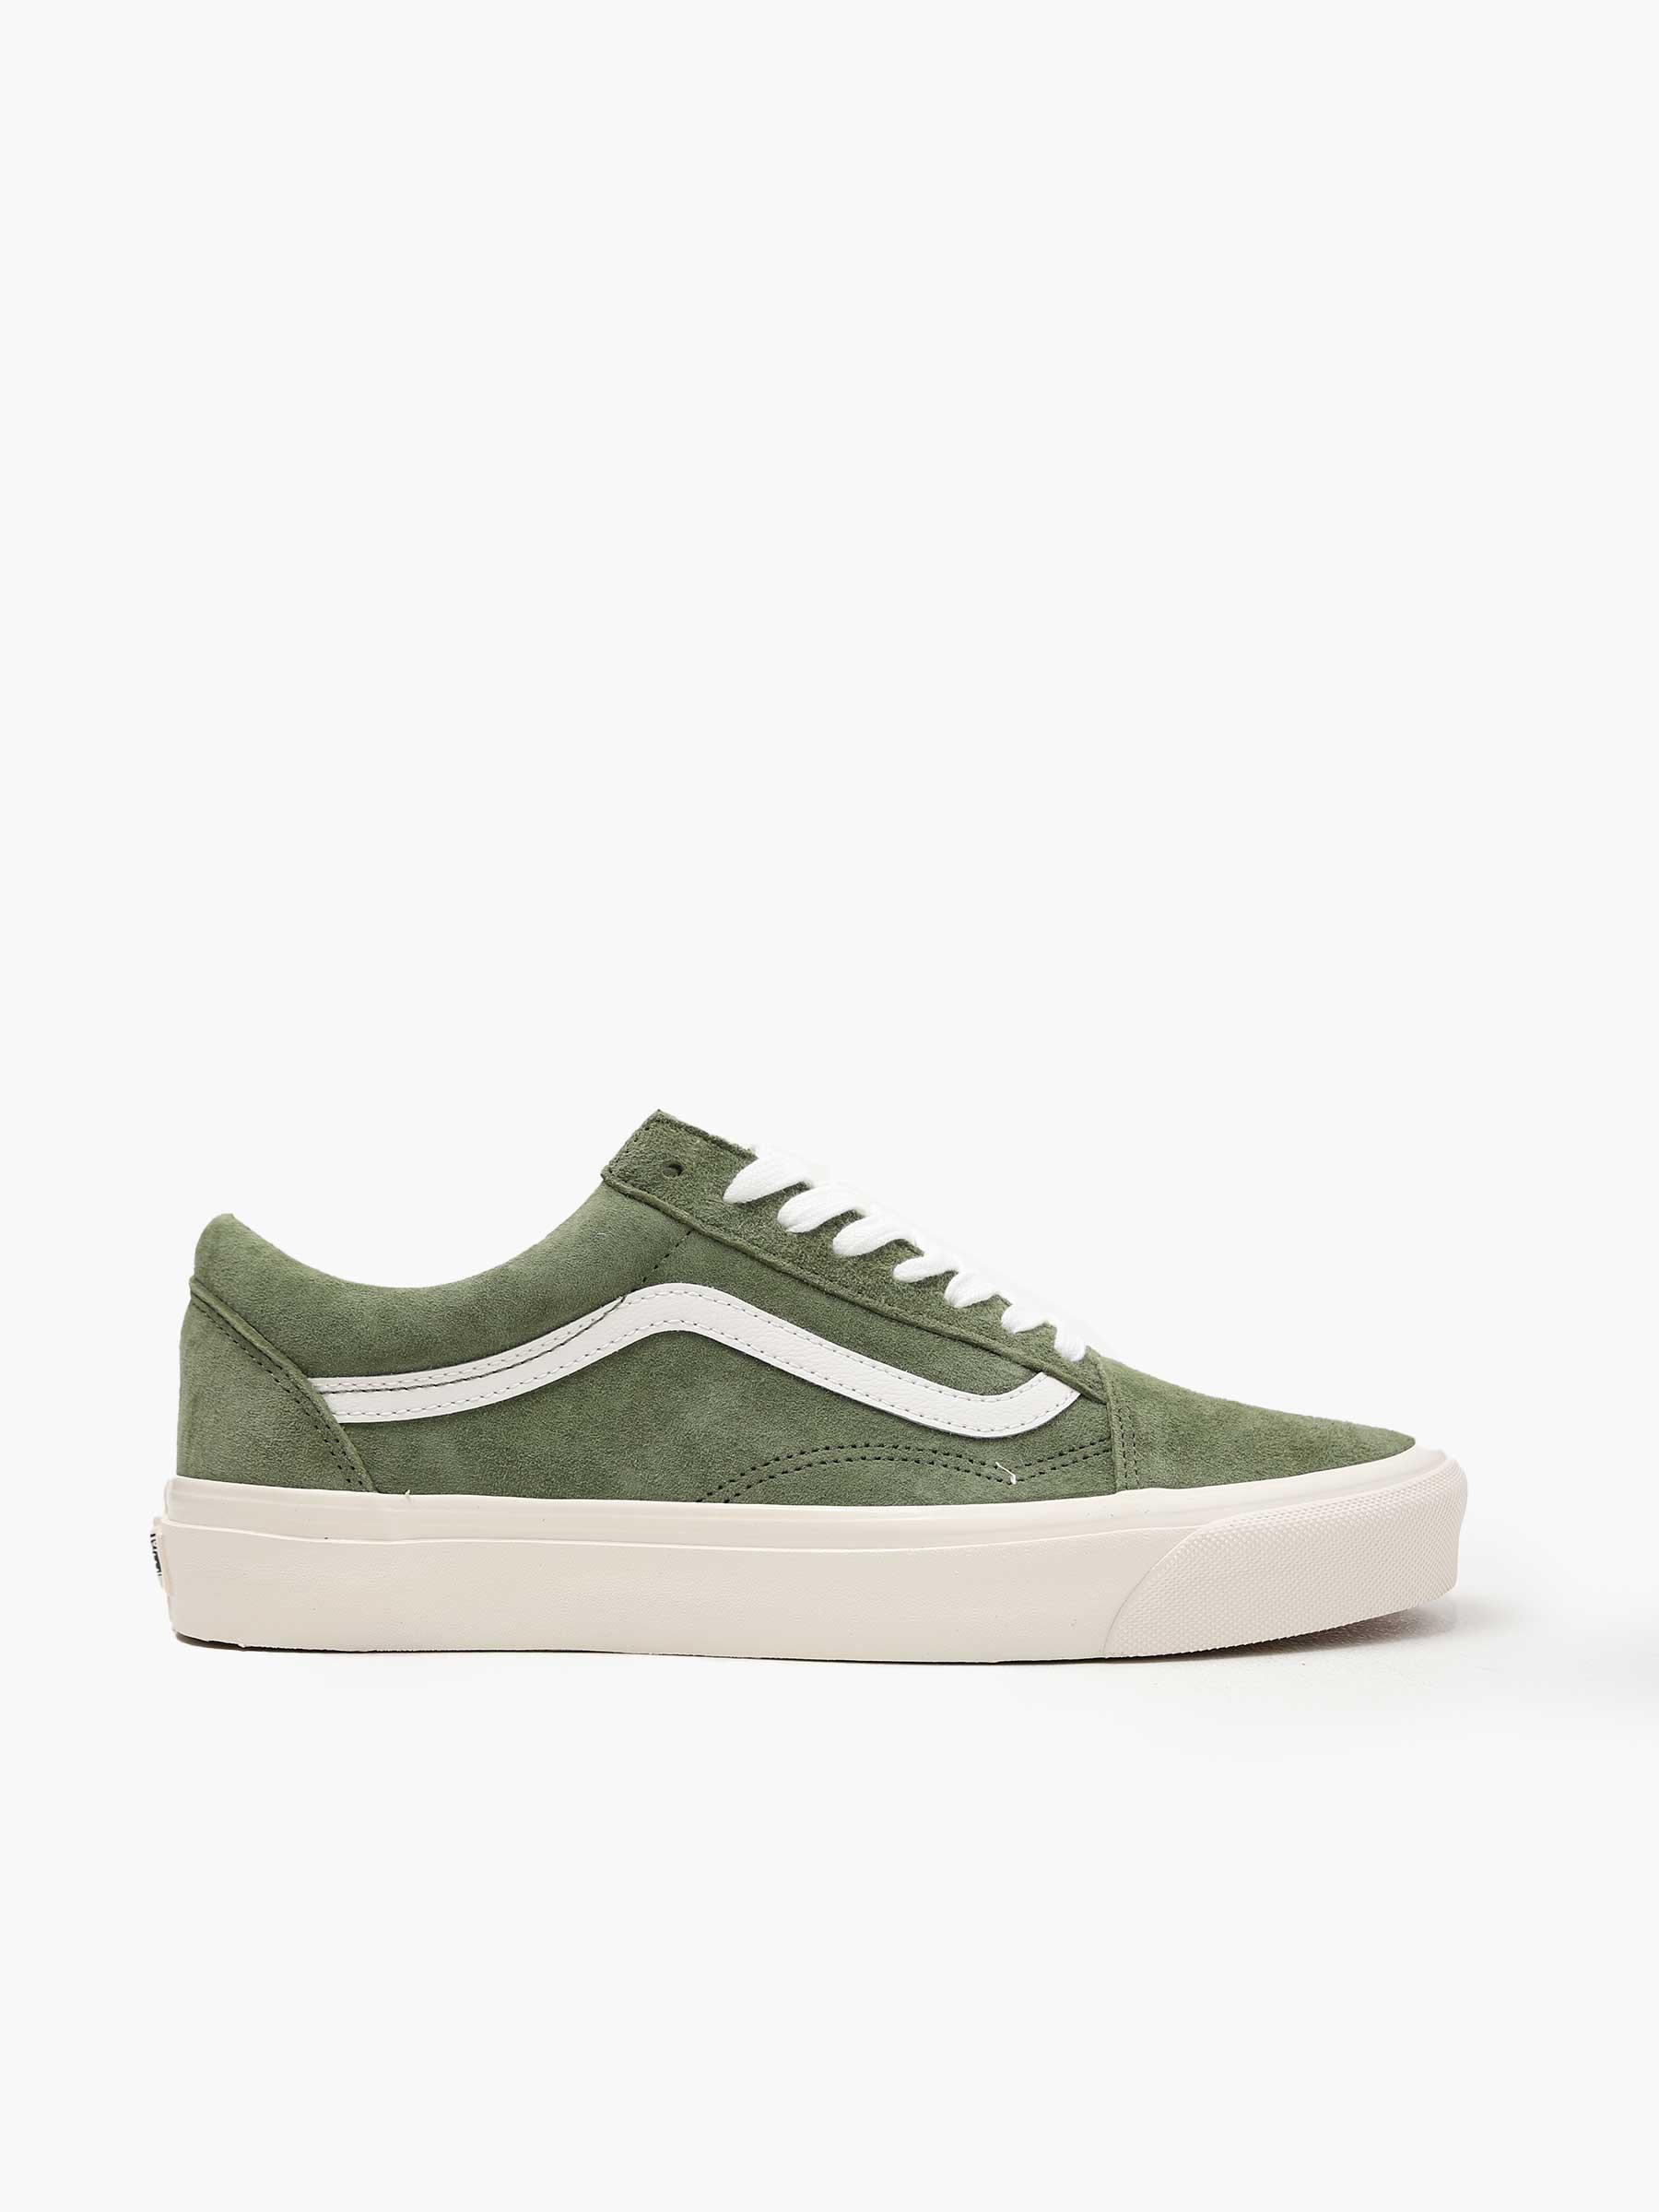 Old Skool 36 DX Pig Suede Loden Green VN0009QFZBF1